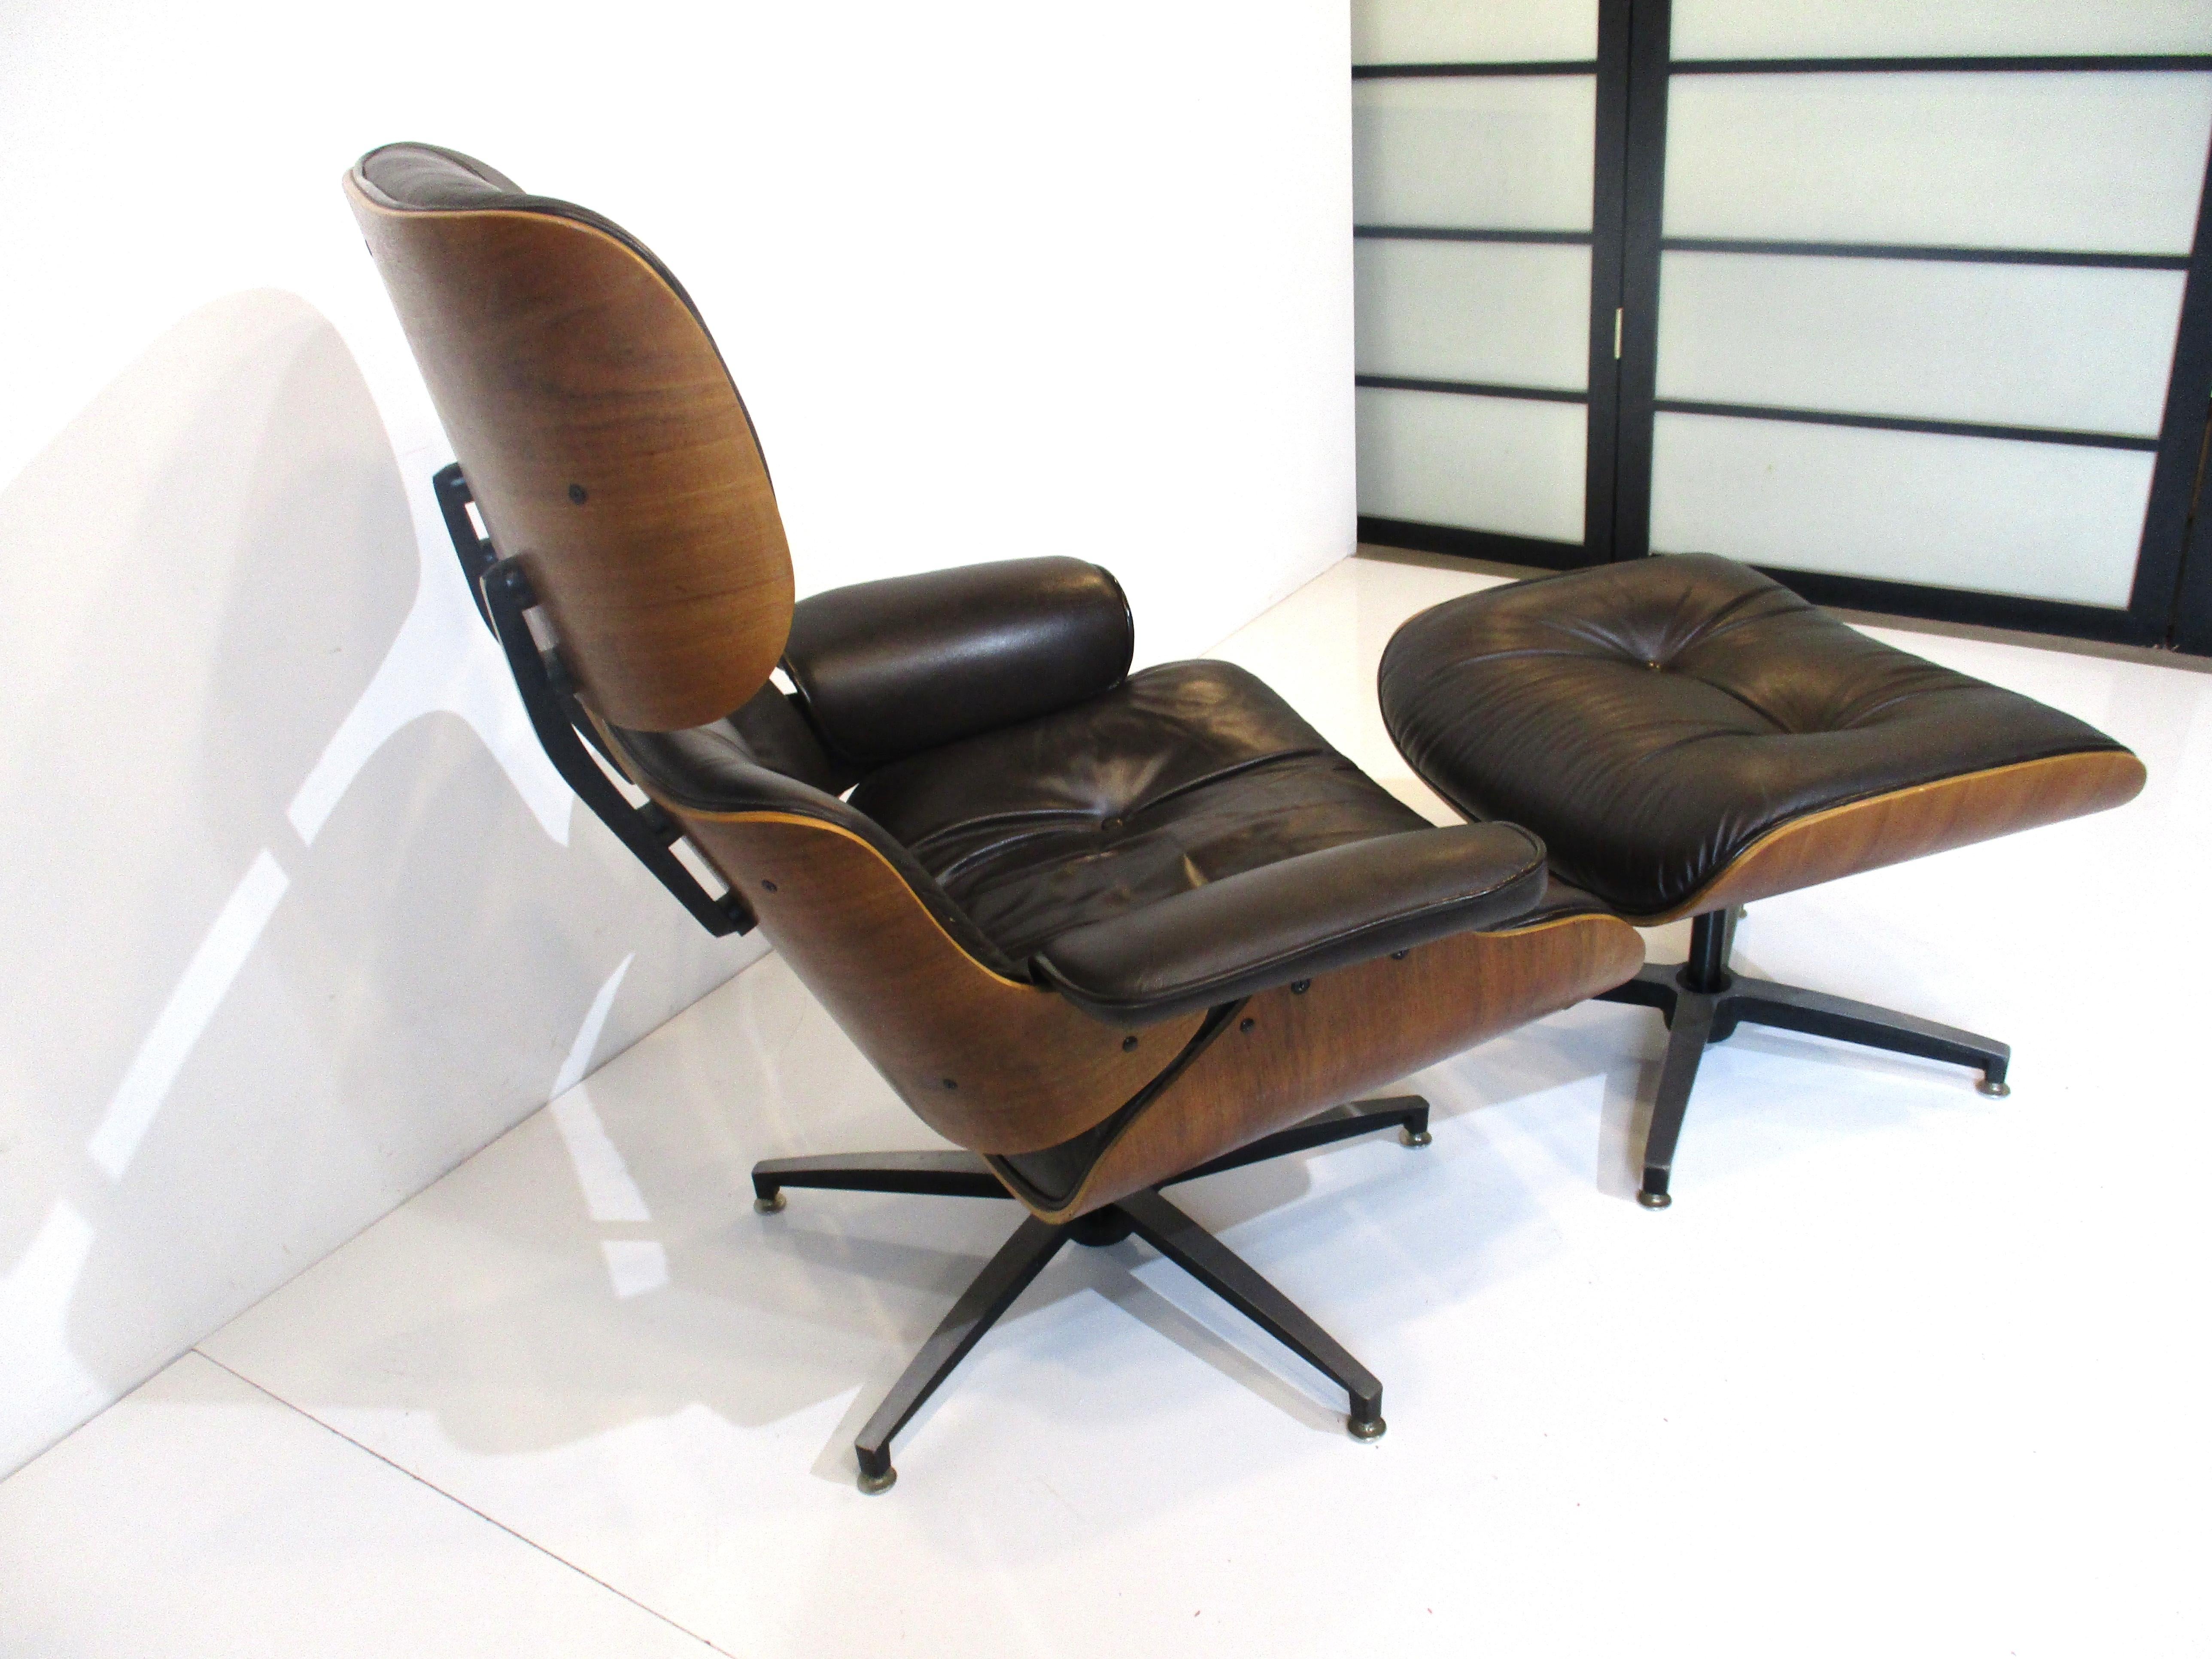 A wonderful walnut lounge chair with matching ottoman in a dark chocolate leather combined with the walnut gives this set a rich and lush look and feel. The chair has a higher profile back perfect for a taller person and an adjustable spring to the